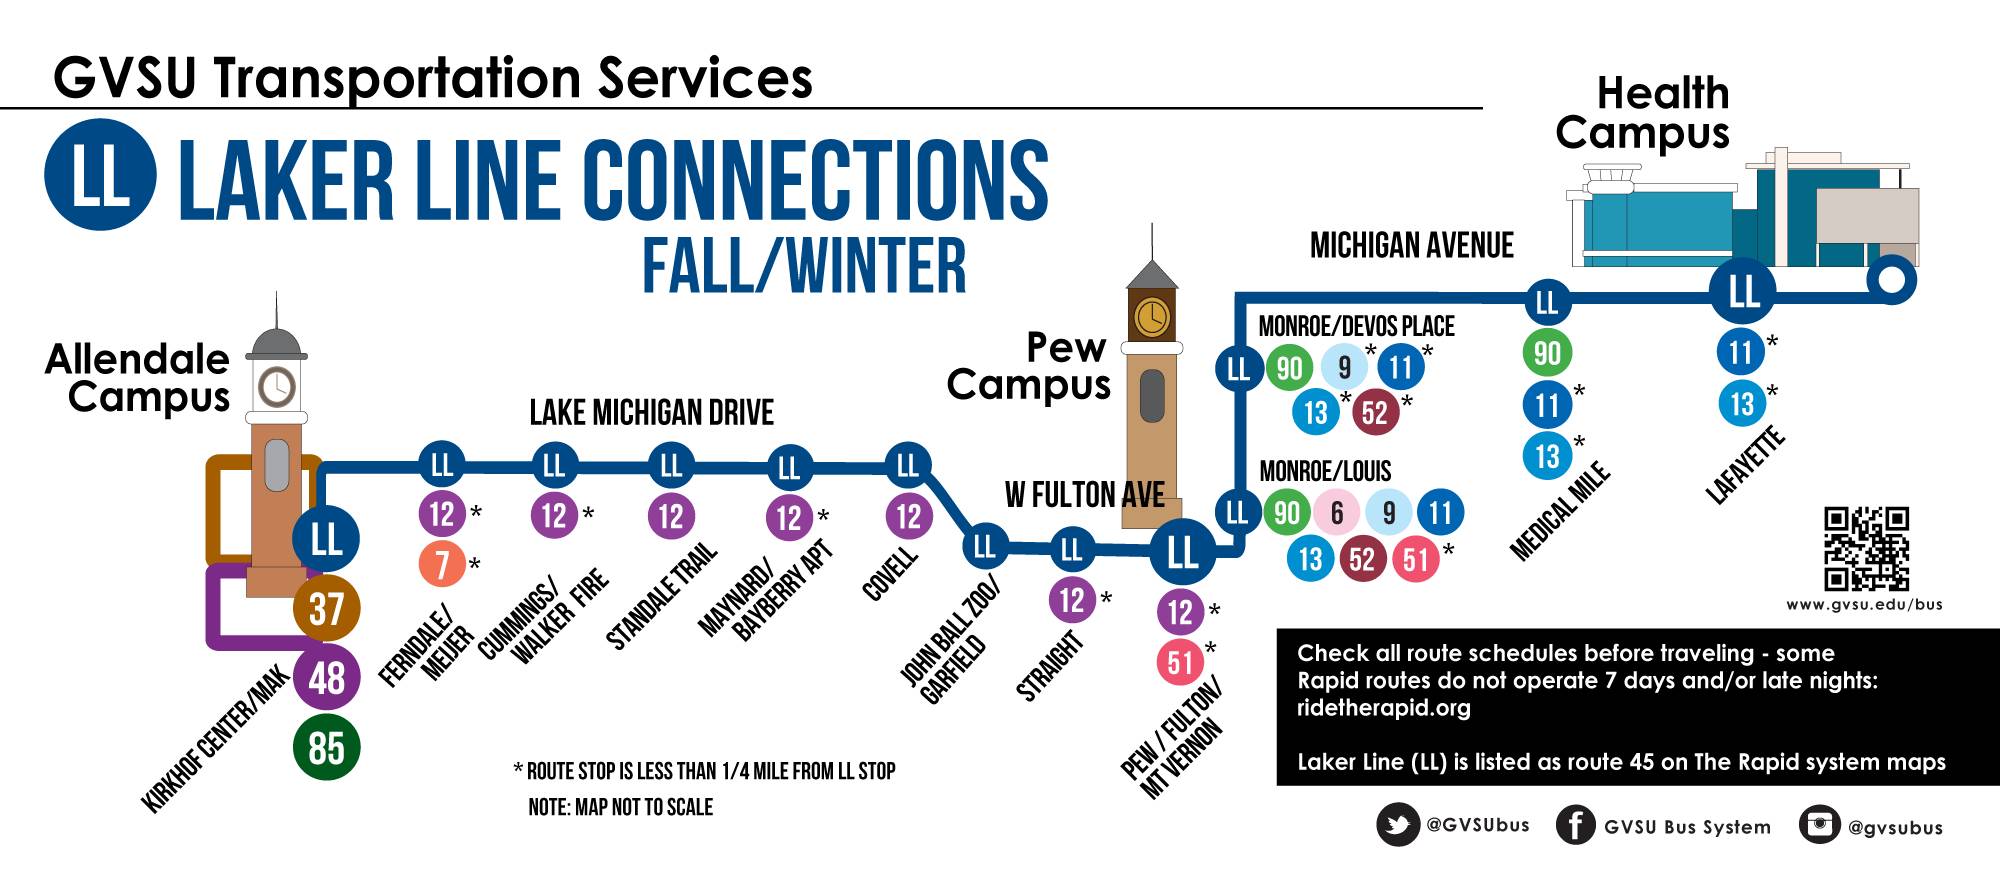 Laker Line Connections to Other Rapid Routes - Fall/Winter